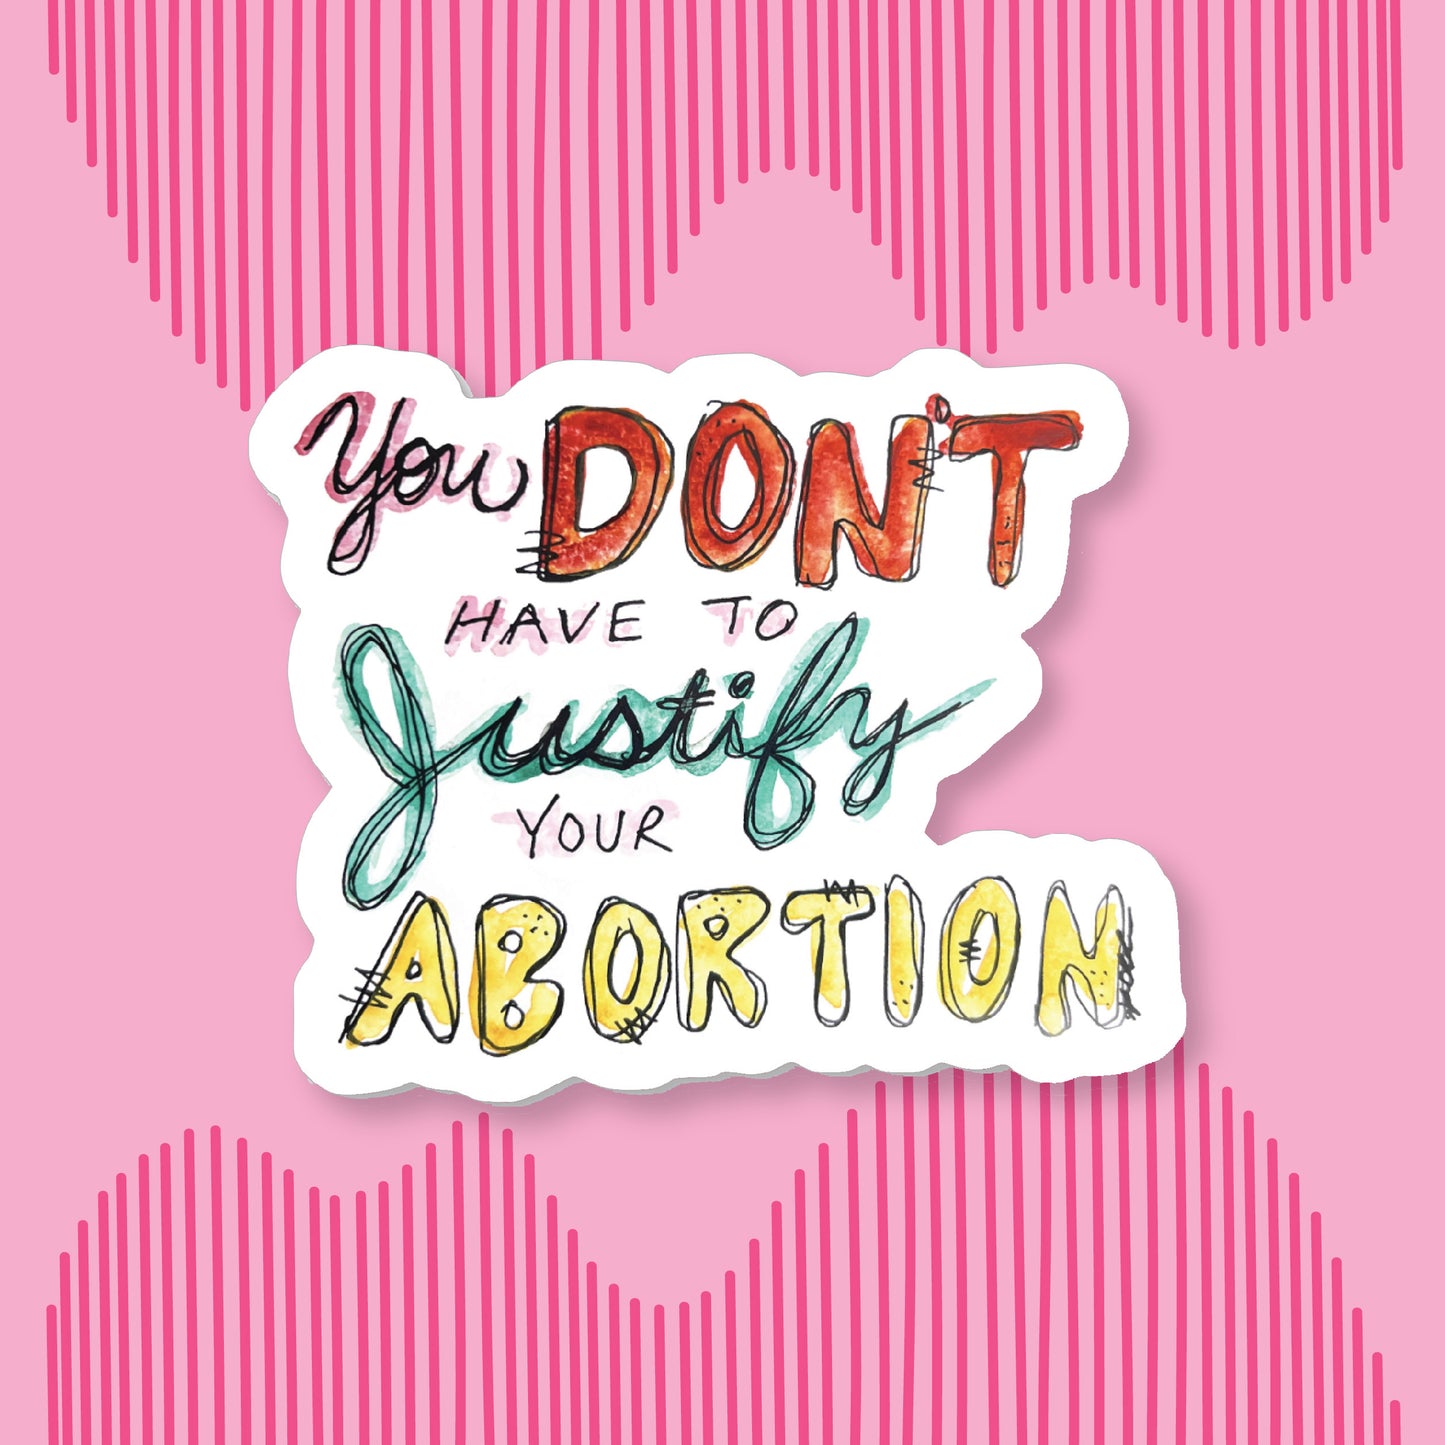 "You Don't Need to Justify your Abortion" Sticker